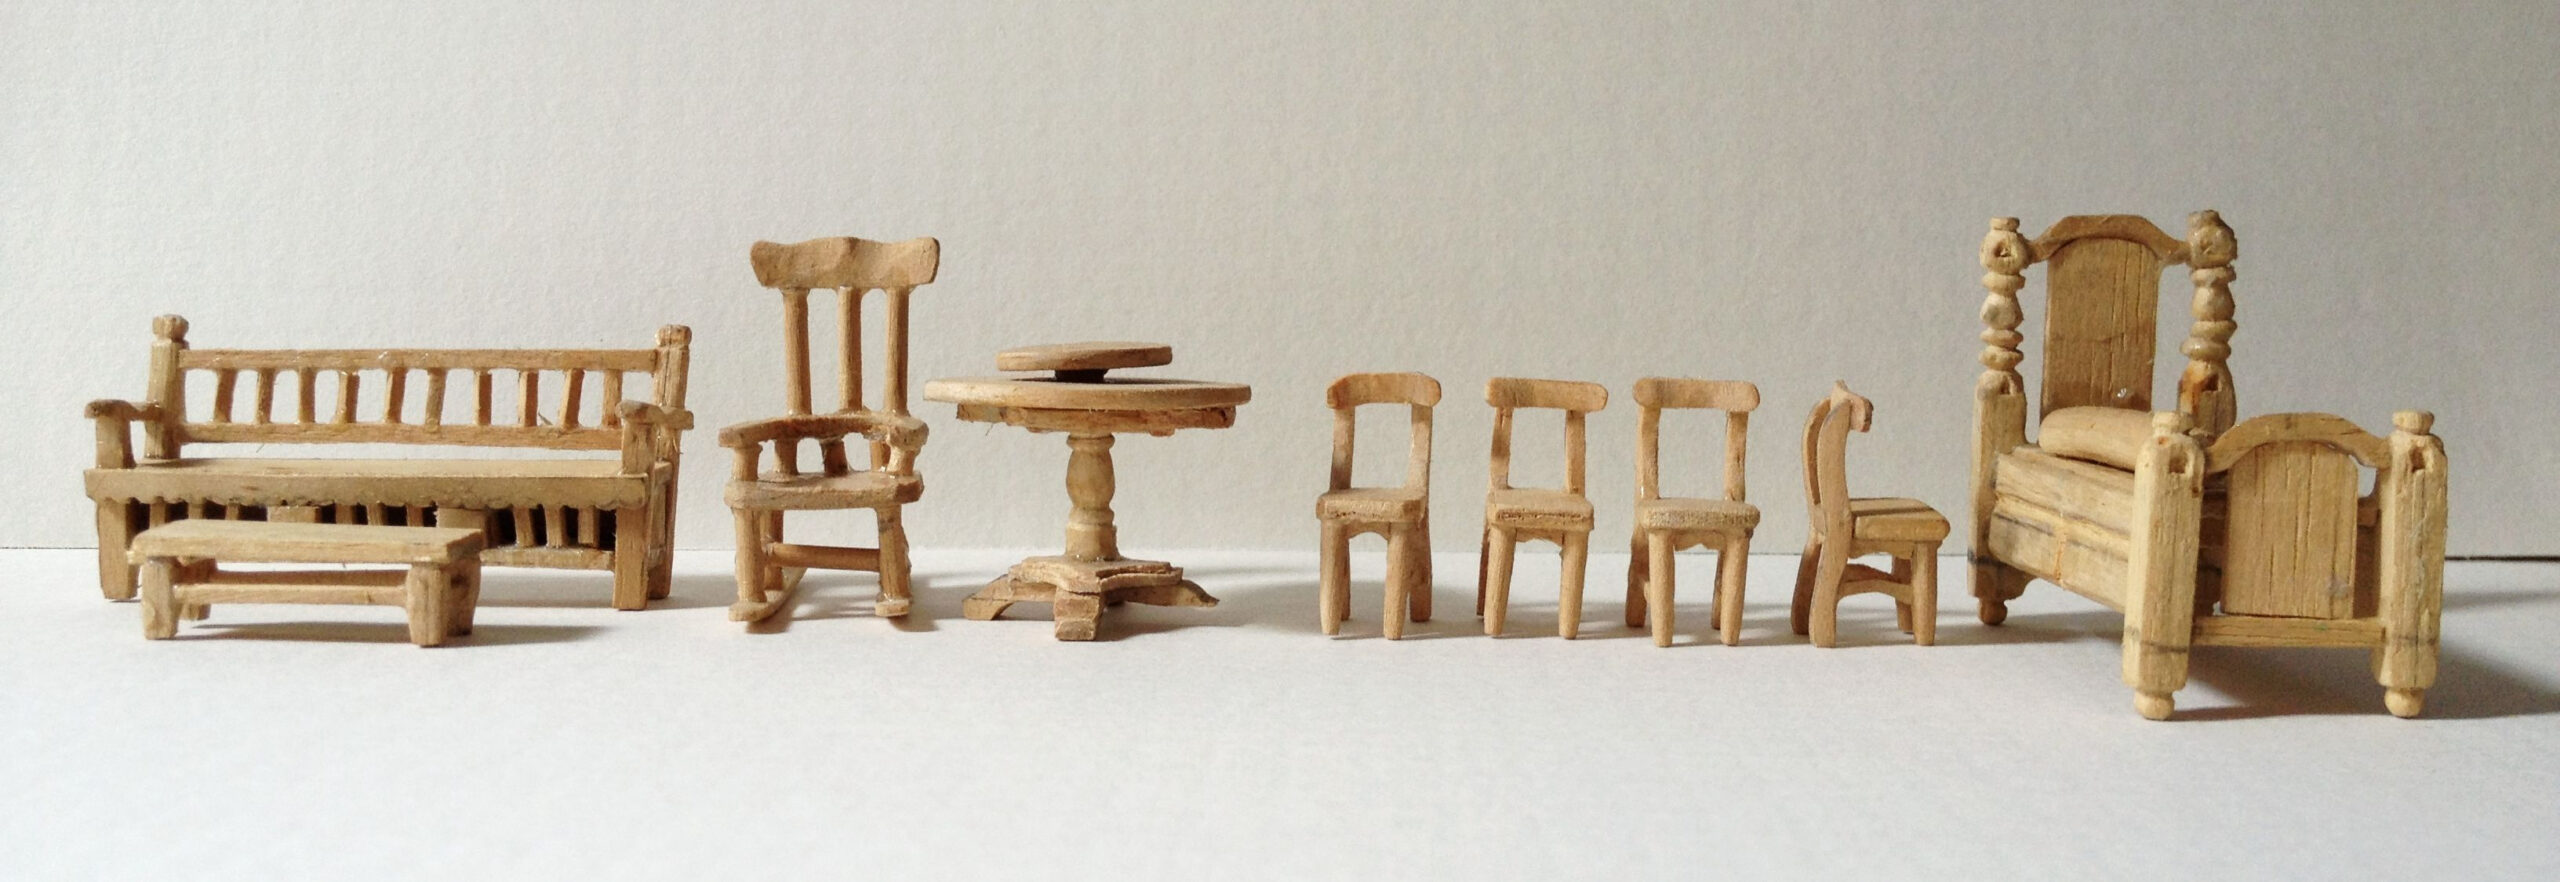 Dollhouse Furniture Pattern Made With Popsicle Sticks